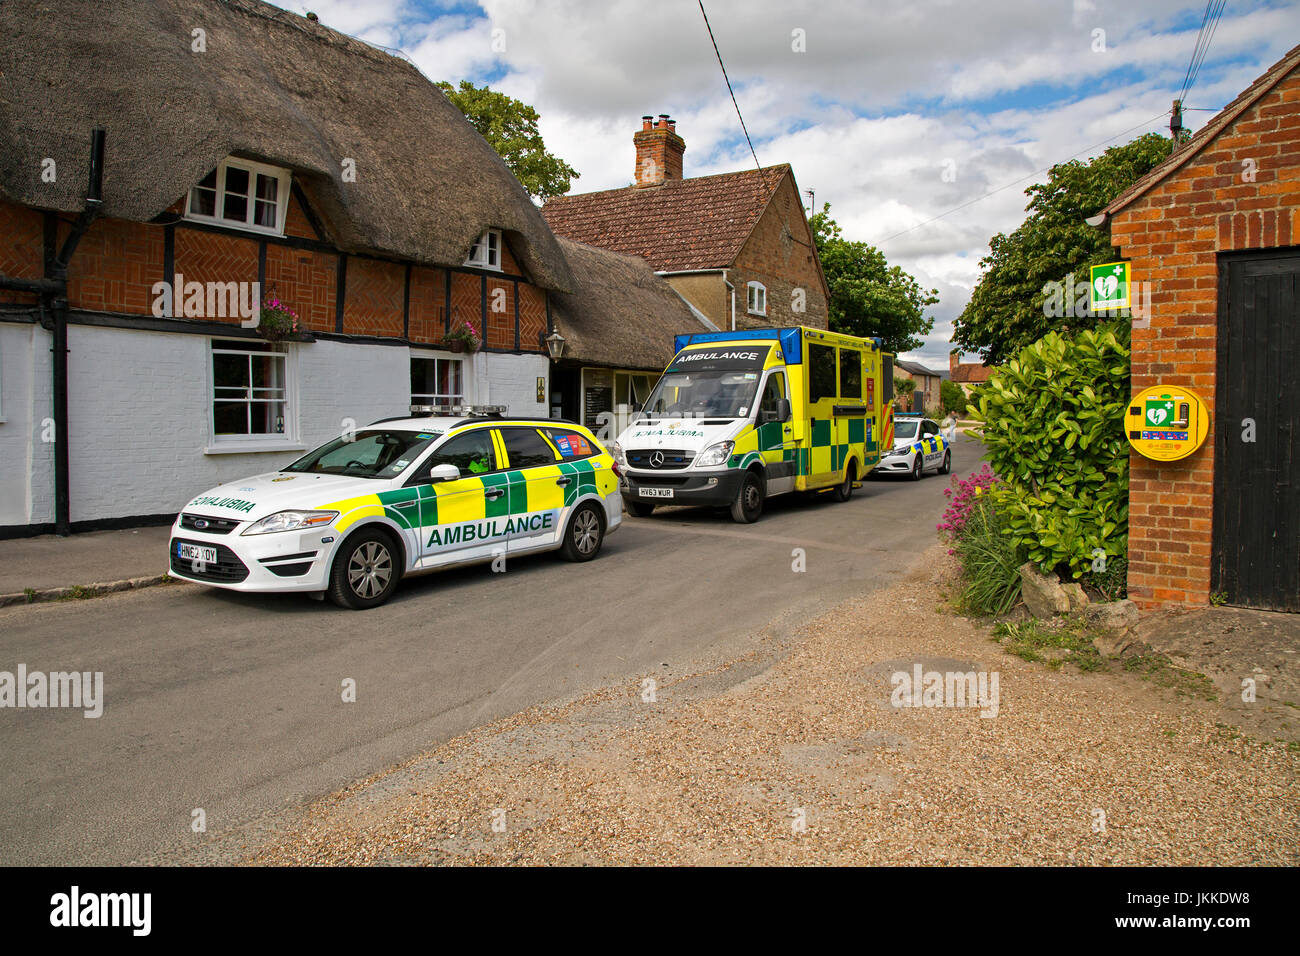 A police car and ambulance parked outside a pub in West Hanney, Wantage, Oxfordshire, UK. Stock Photo